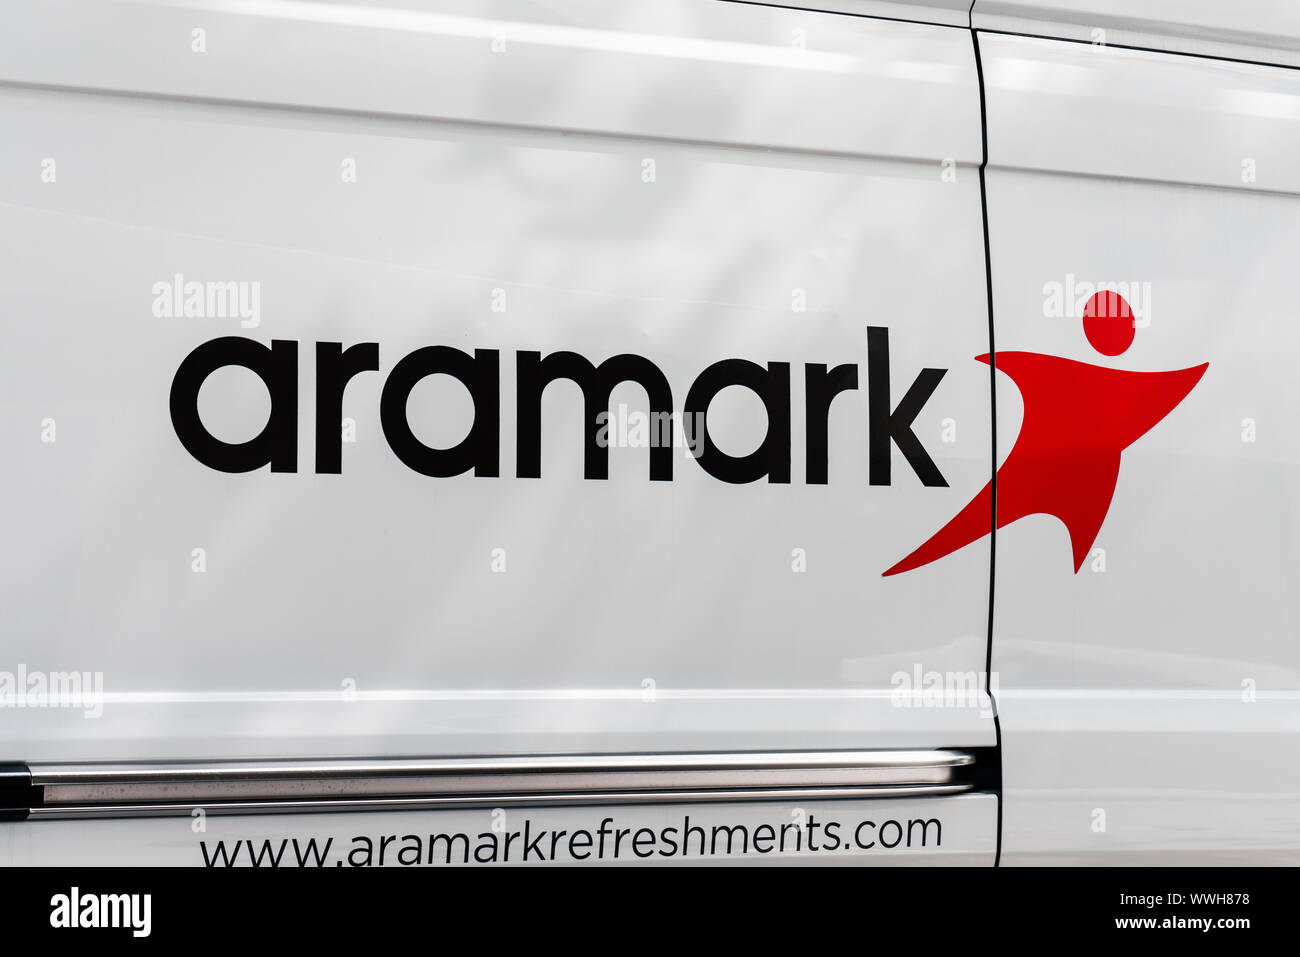 August 21, 2019 San Francisco / CA / USA - Aramark sign displayed on a vehicle making a delivery; Aramark Corporation is an American food service, fac Stock Photo